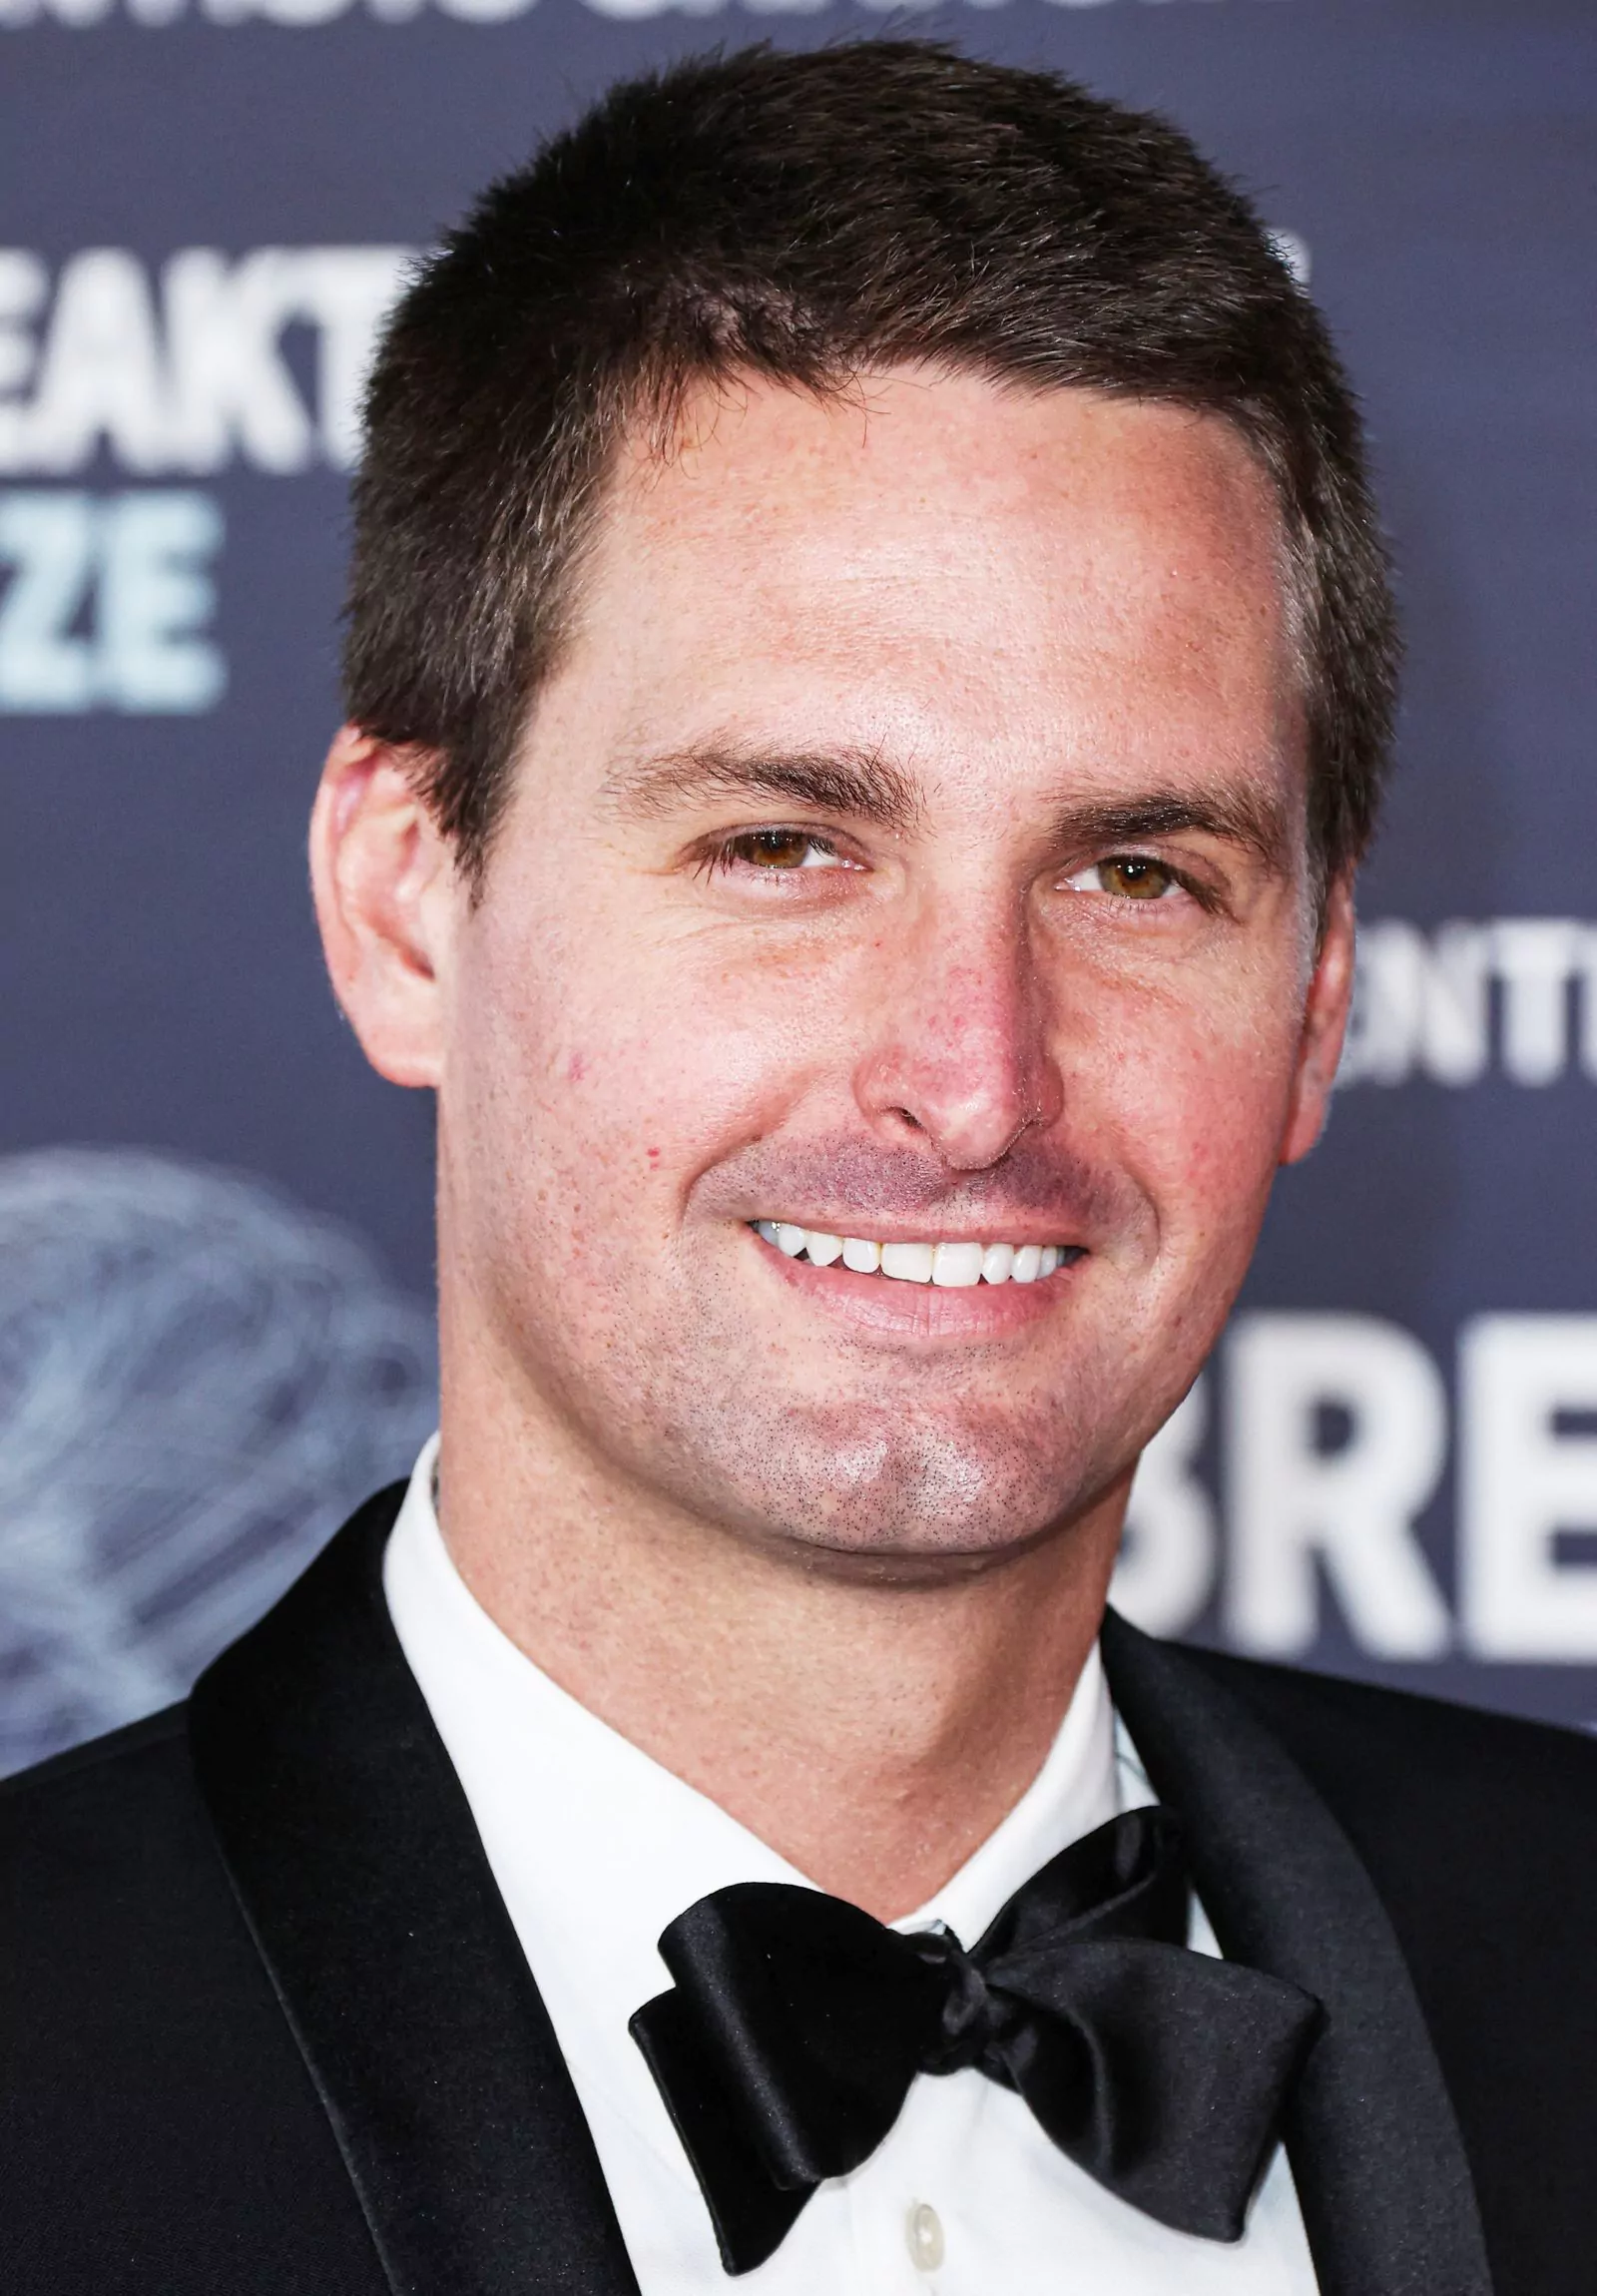 Evan Spiegel at the 9th Annual Breakthrough Awards in Los Angeles on April 15, 2023.